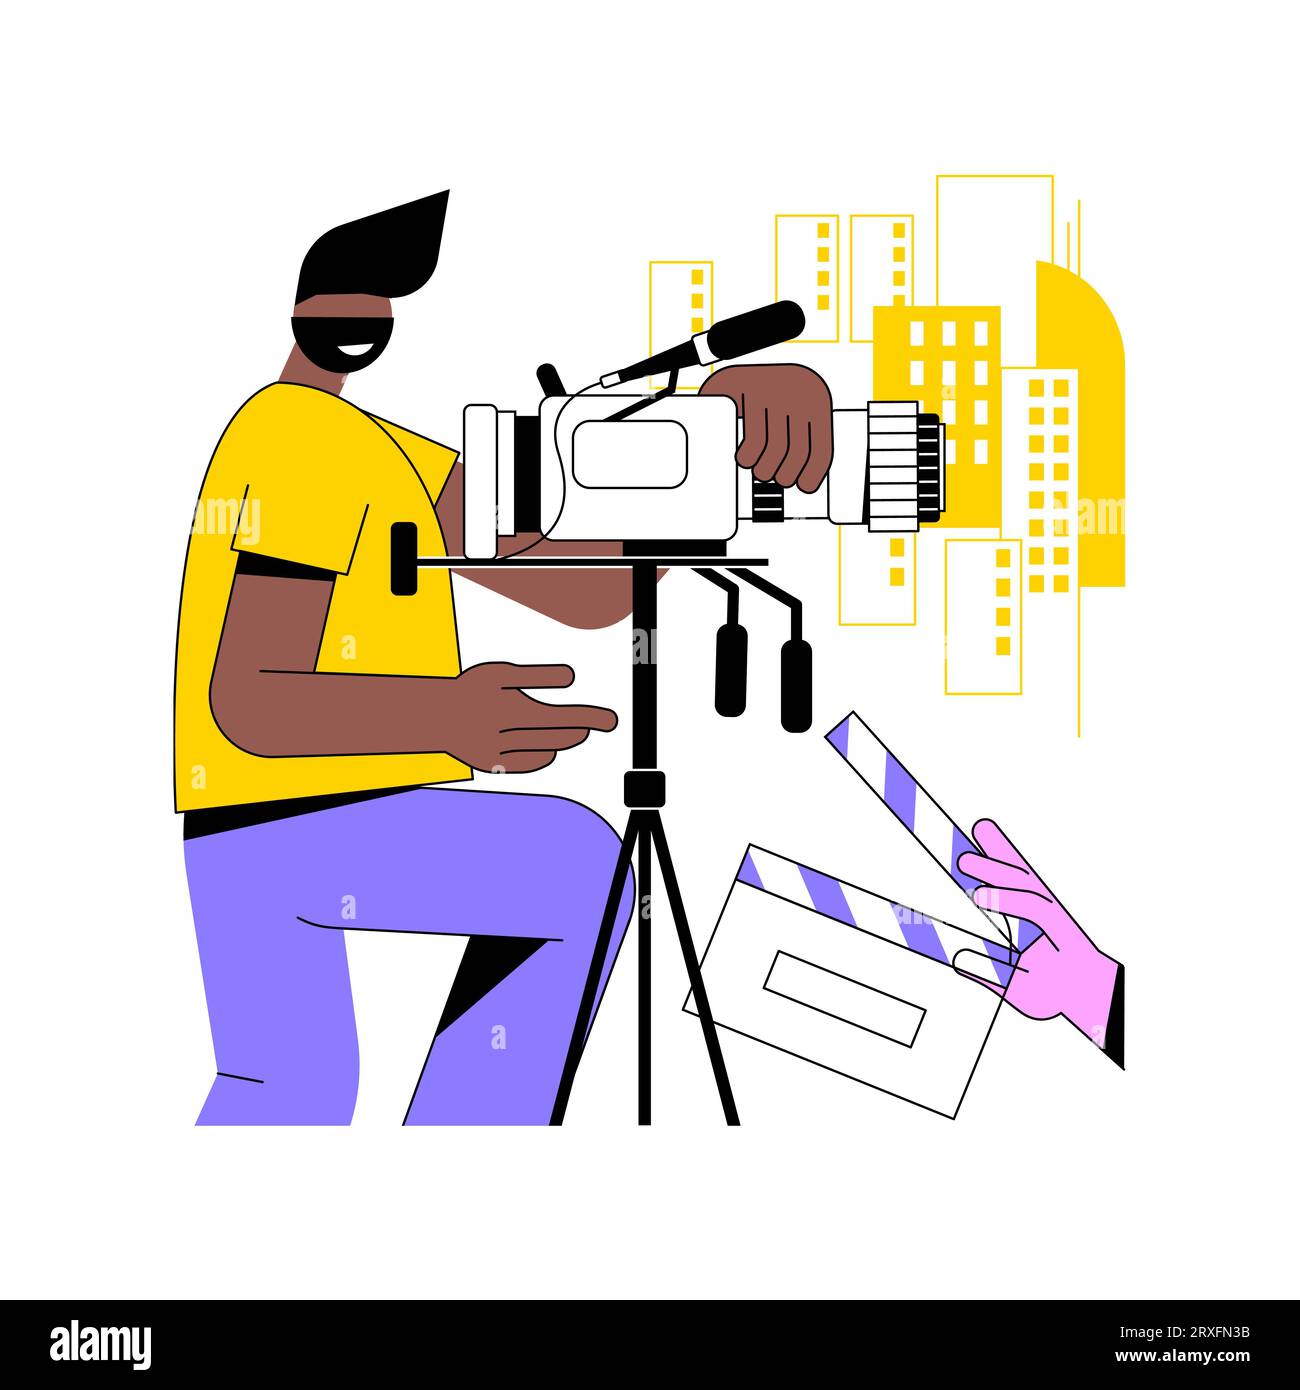 Videographer isolated cartoon vector illustrations. Man using camera, video making, filming event, production service, small business, self-employed specialist, freelance work vector cartoon. Stock Vector